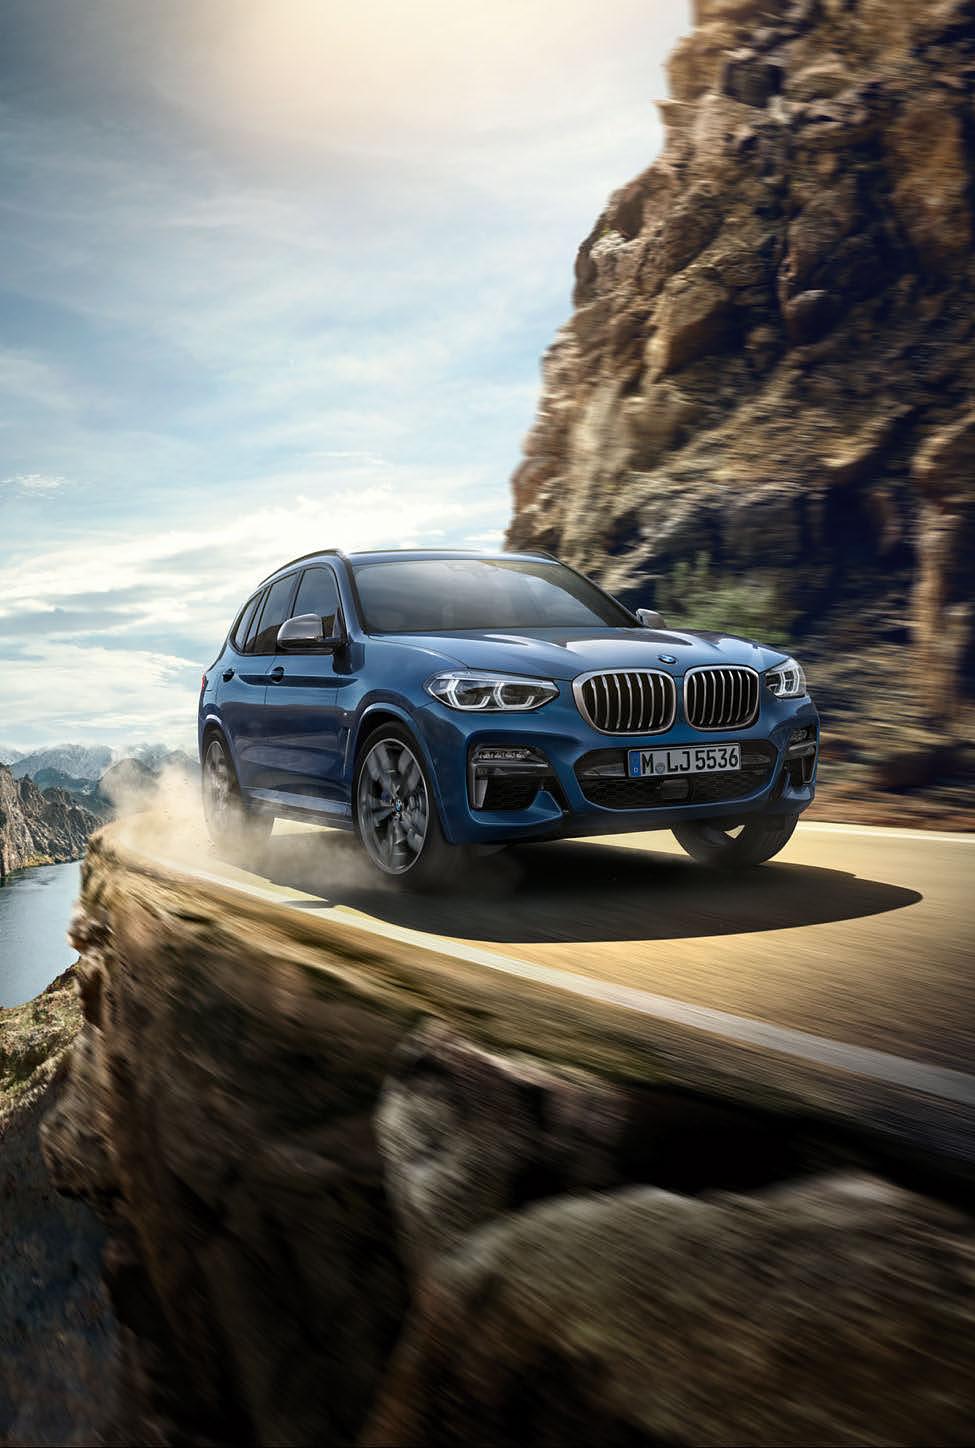 Sheer Driving Pleasure THE NEW BMW X3.